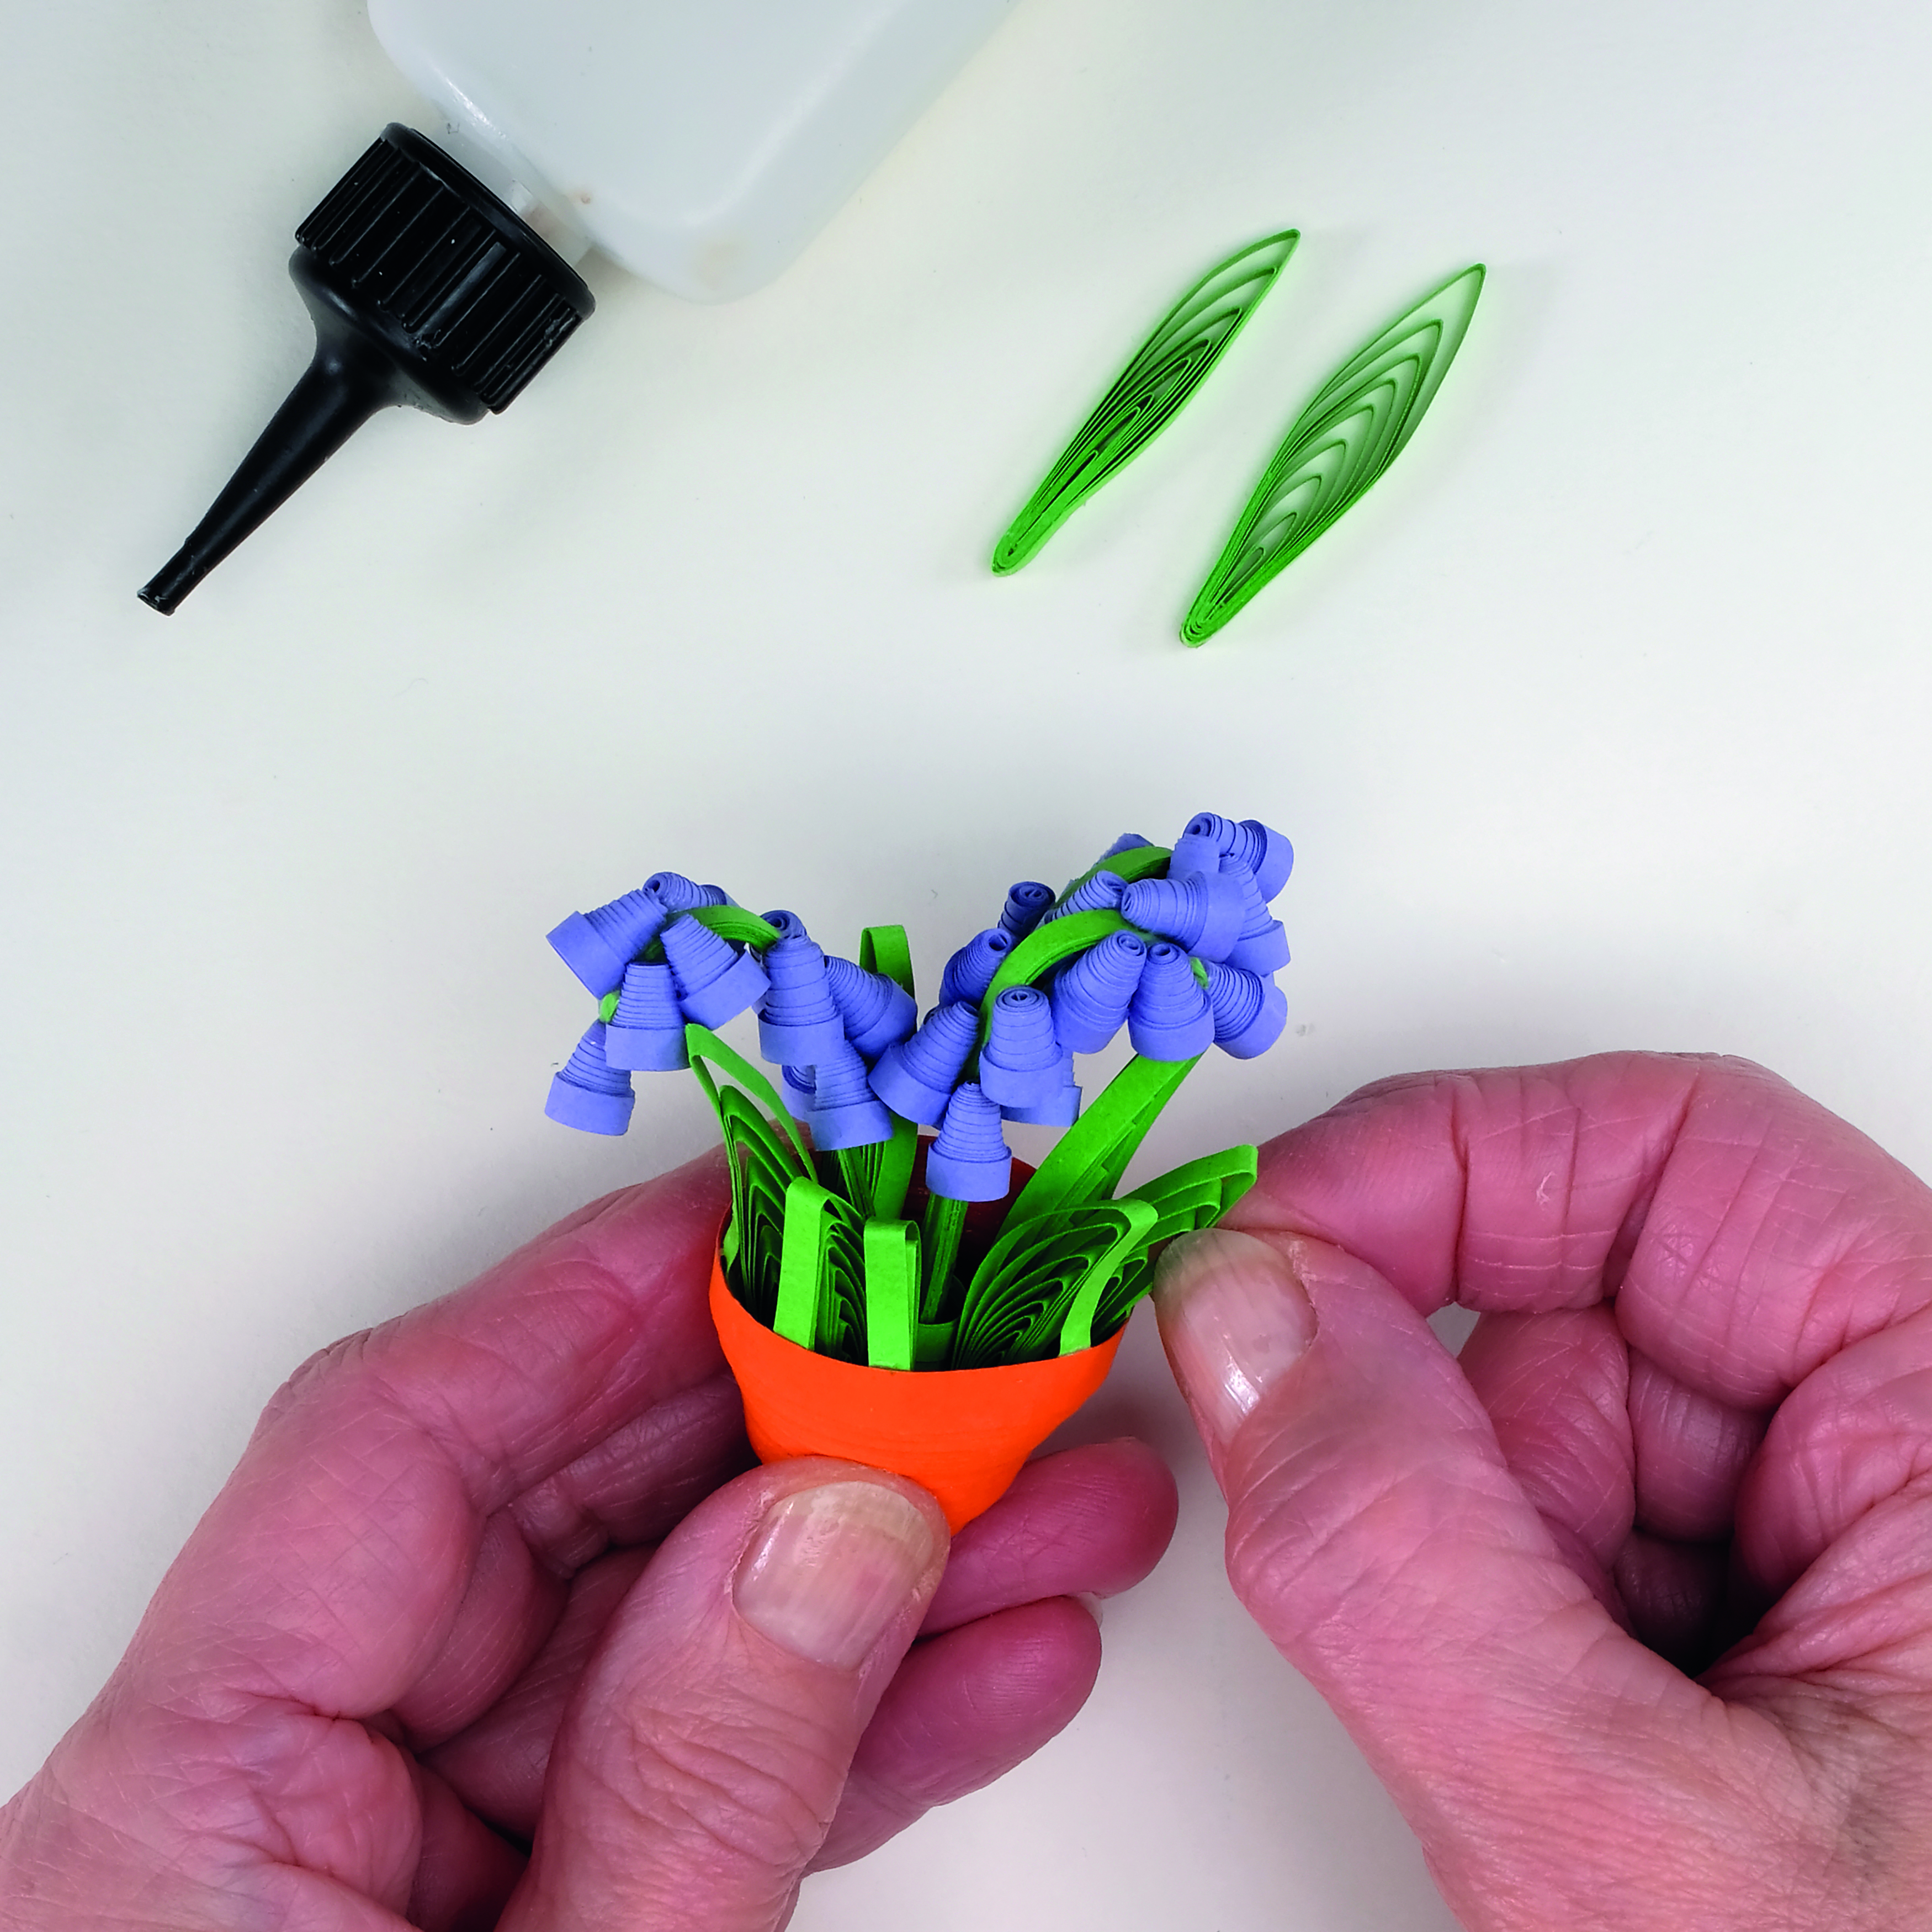 How to make quilled flowers – bluebells, step 4